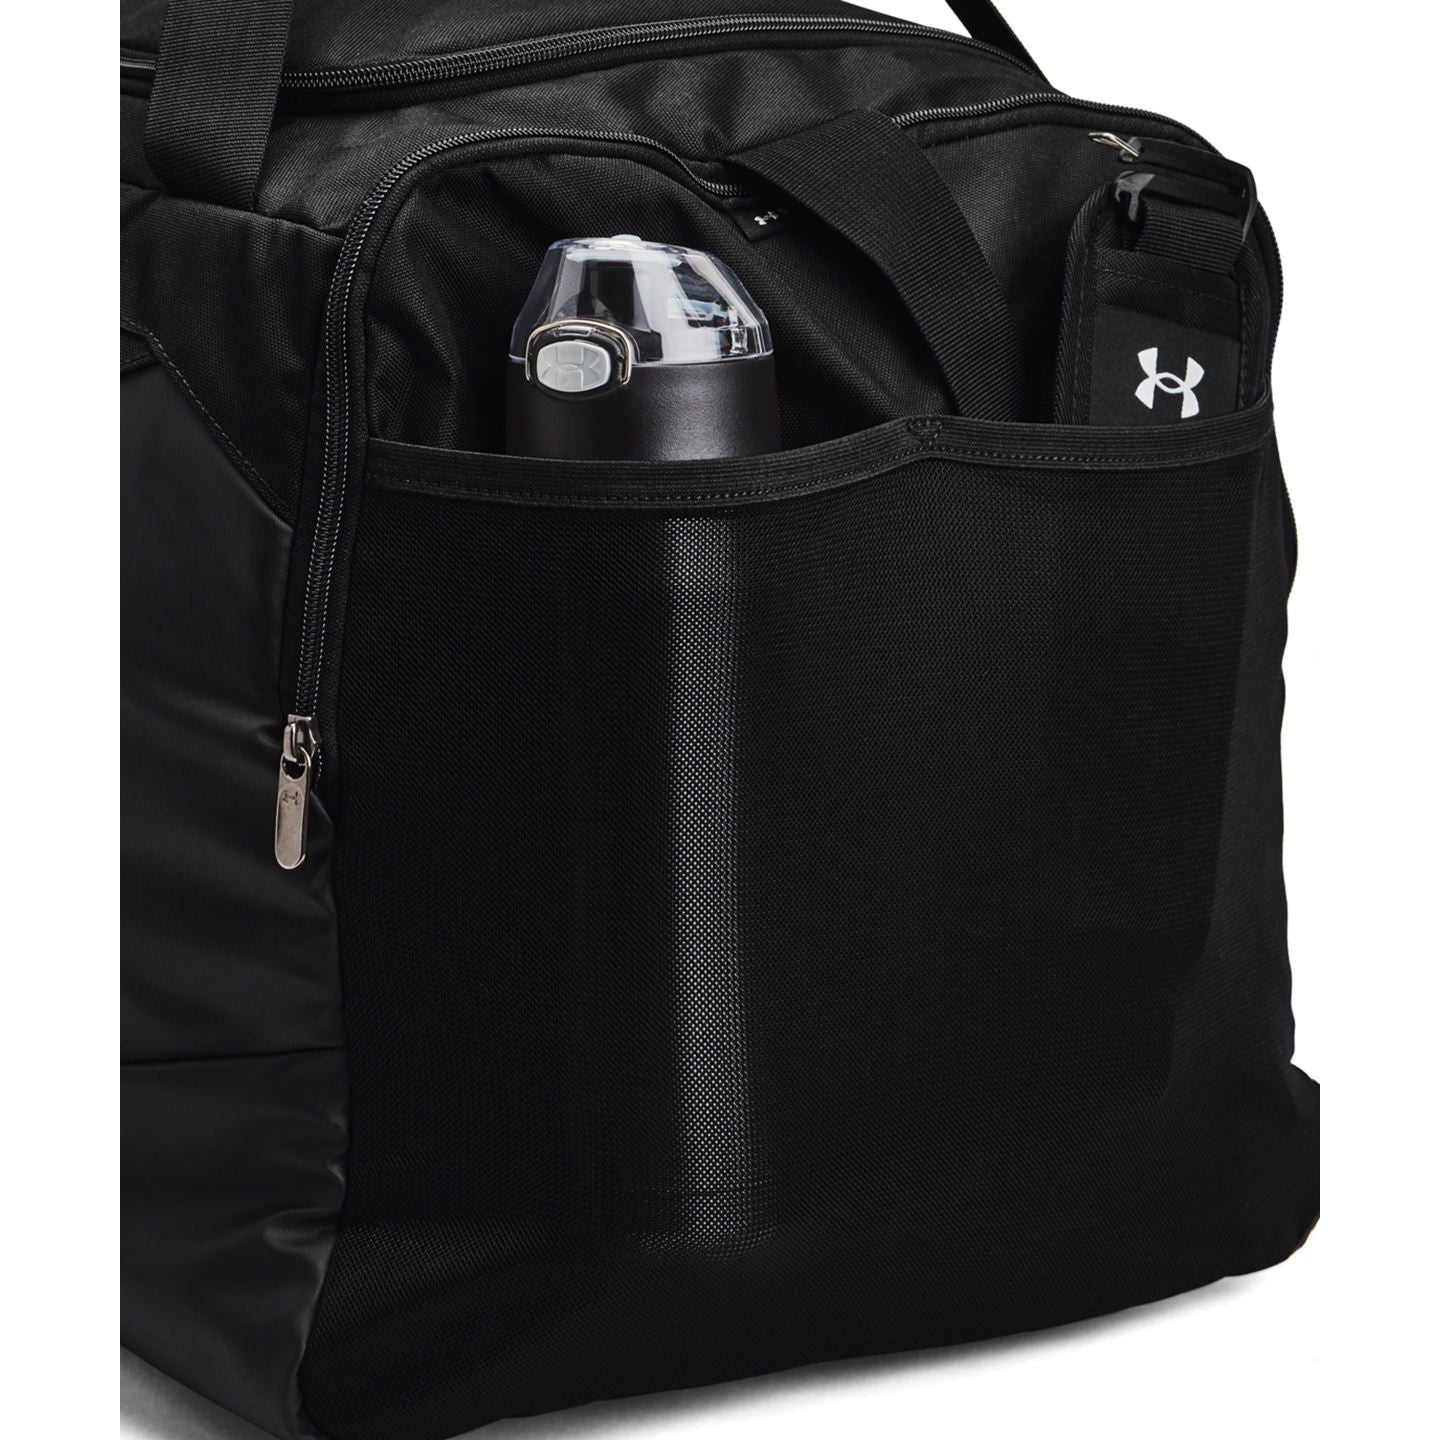 Under Armour Undeniable 5.0 Large Duffle